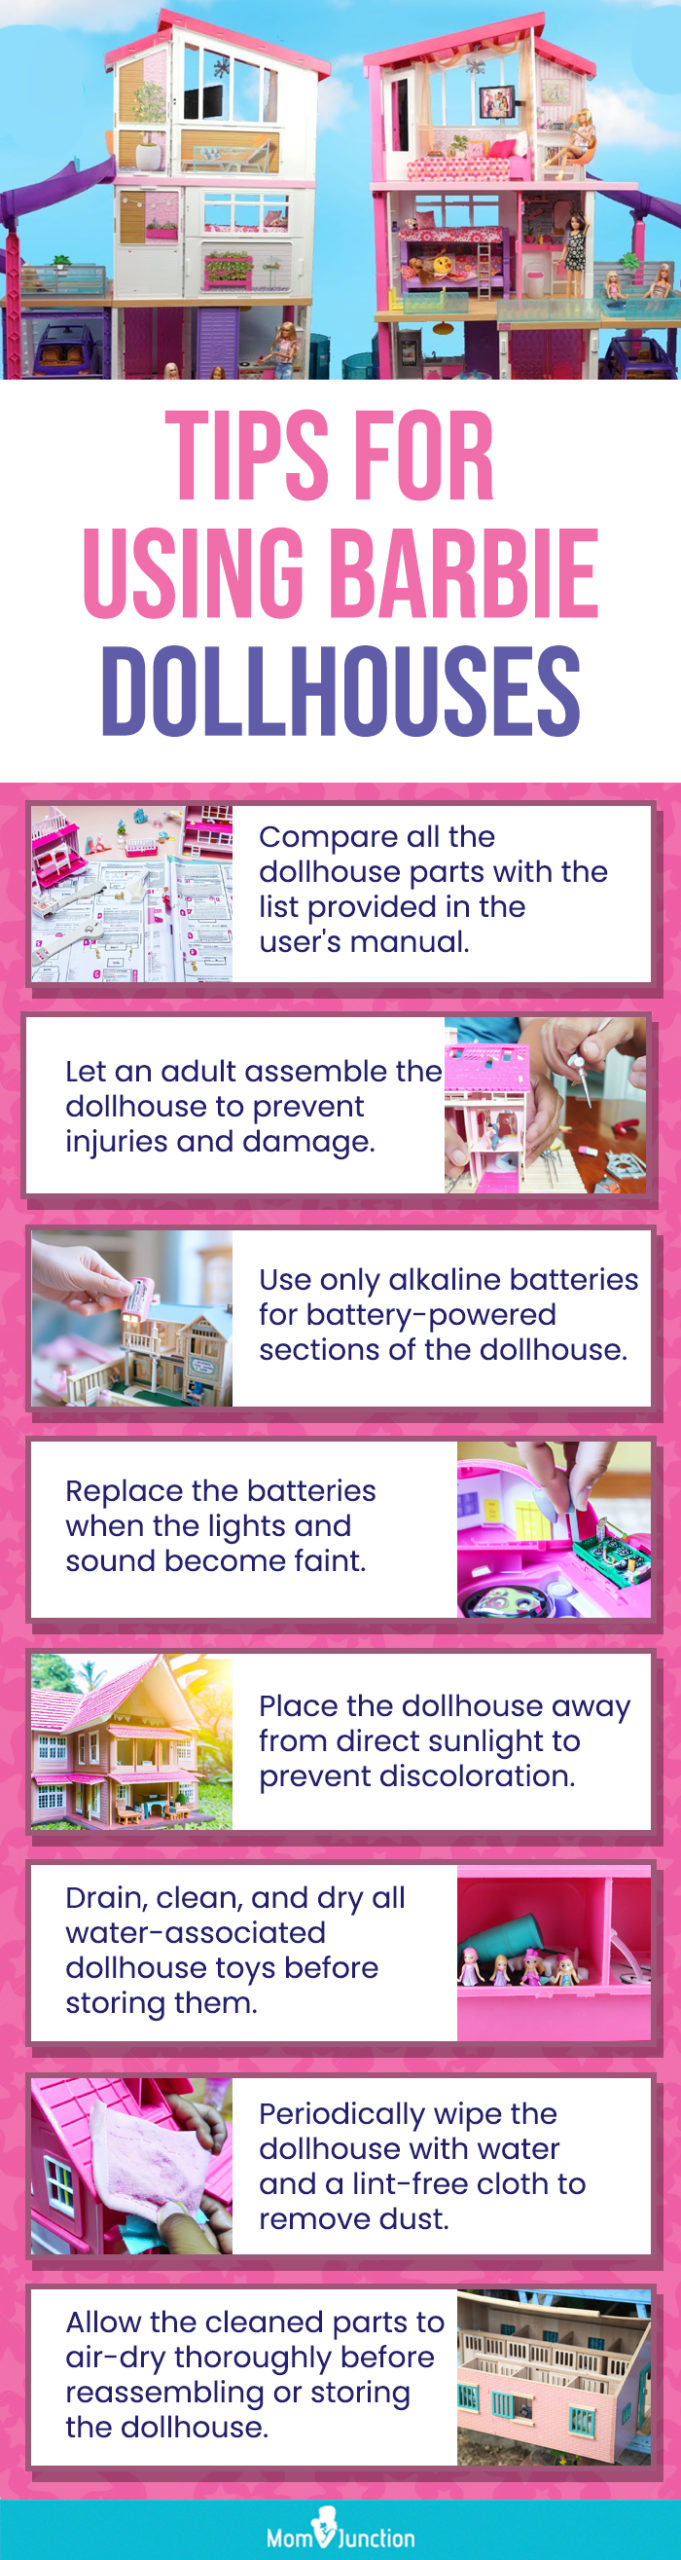 Tips For Using Barbie Dollhouses (infographic)